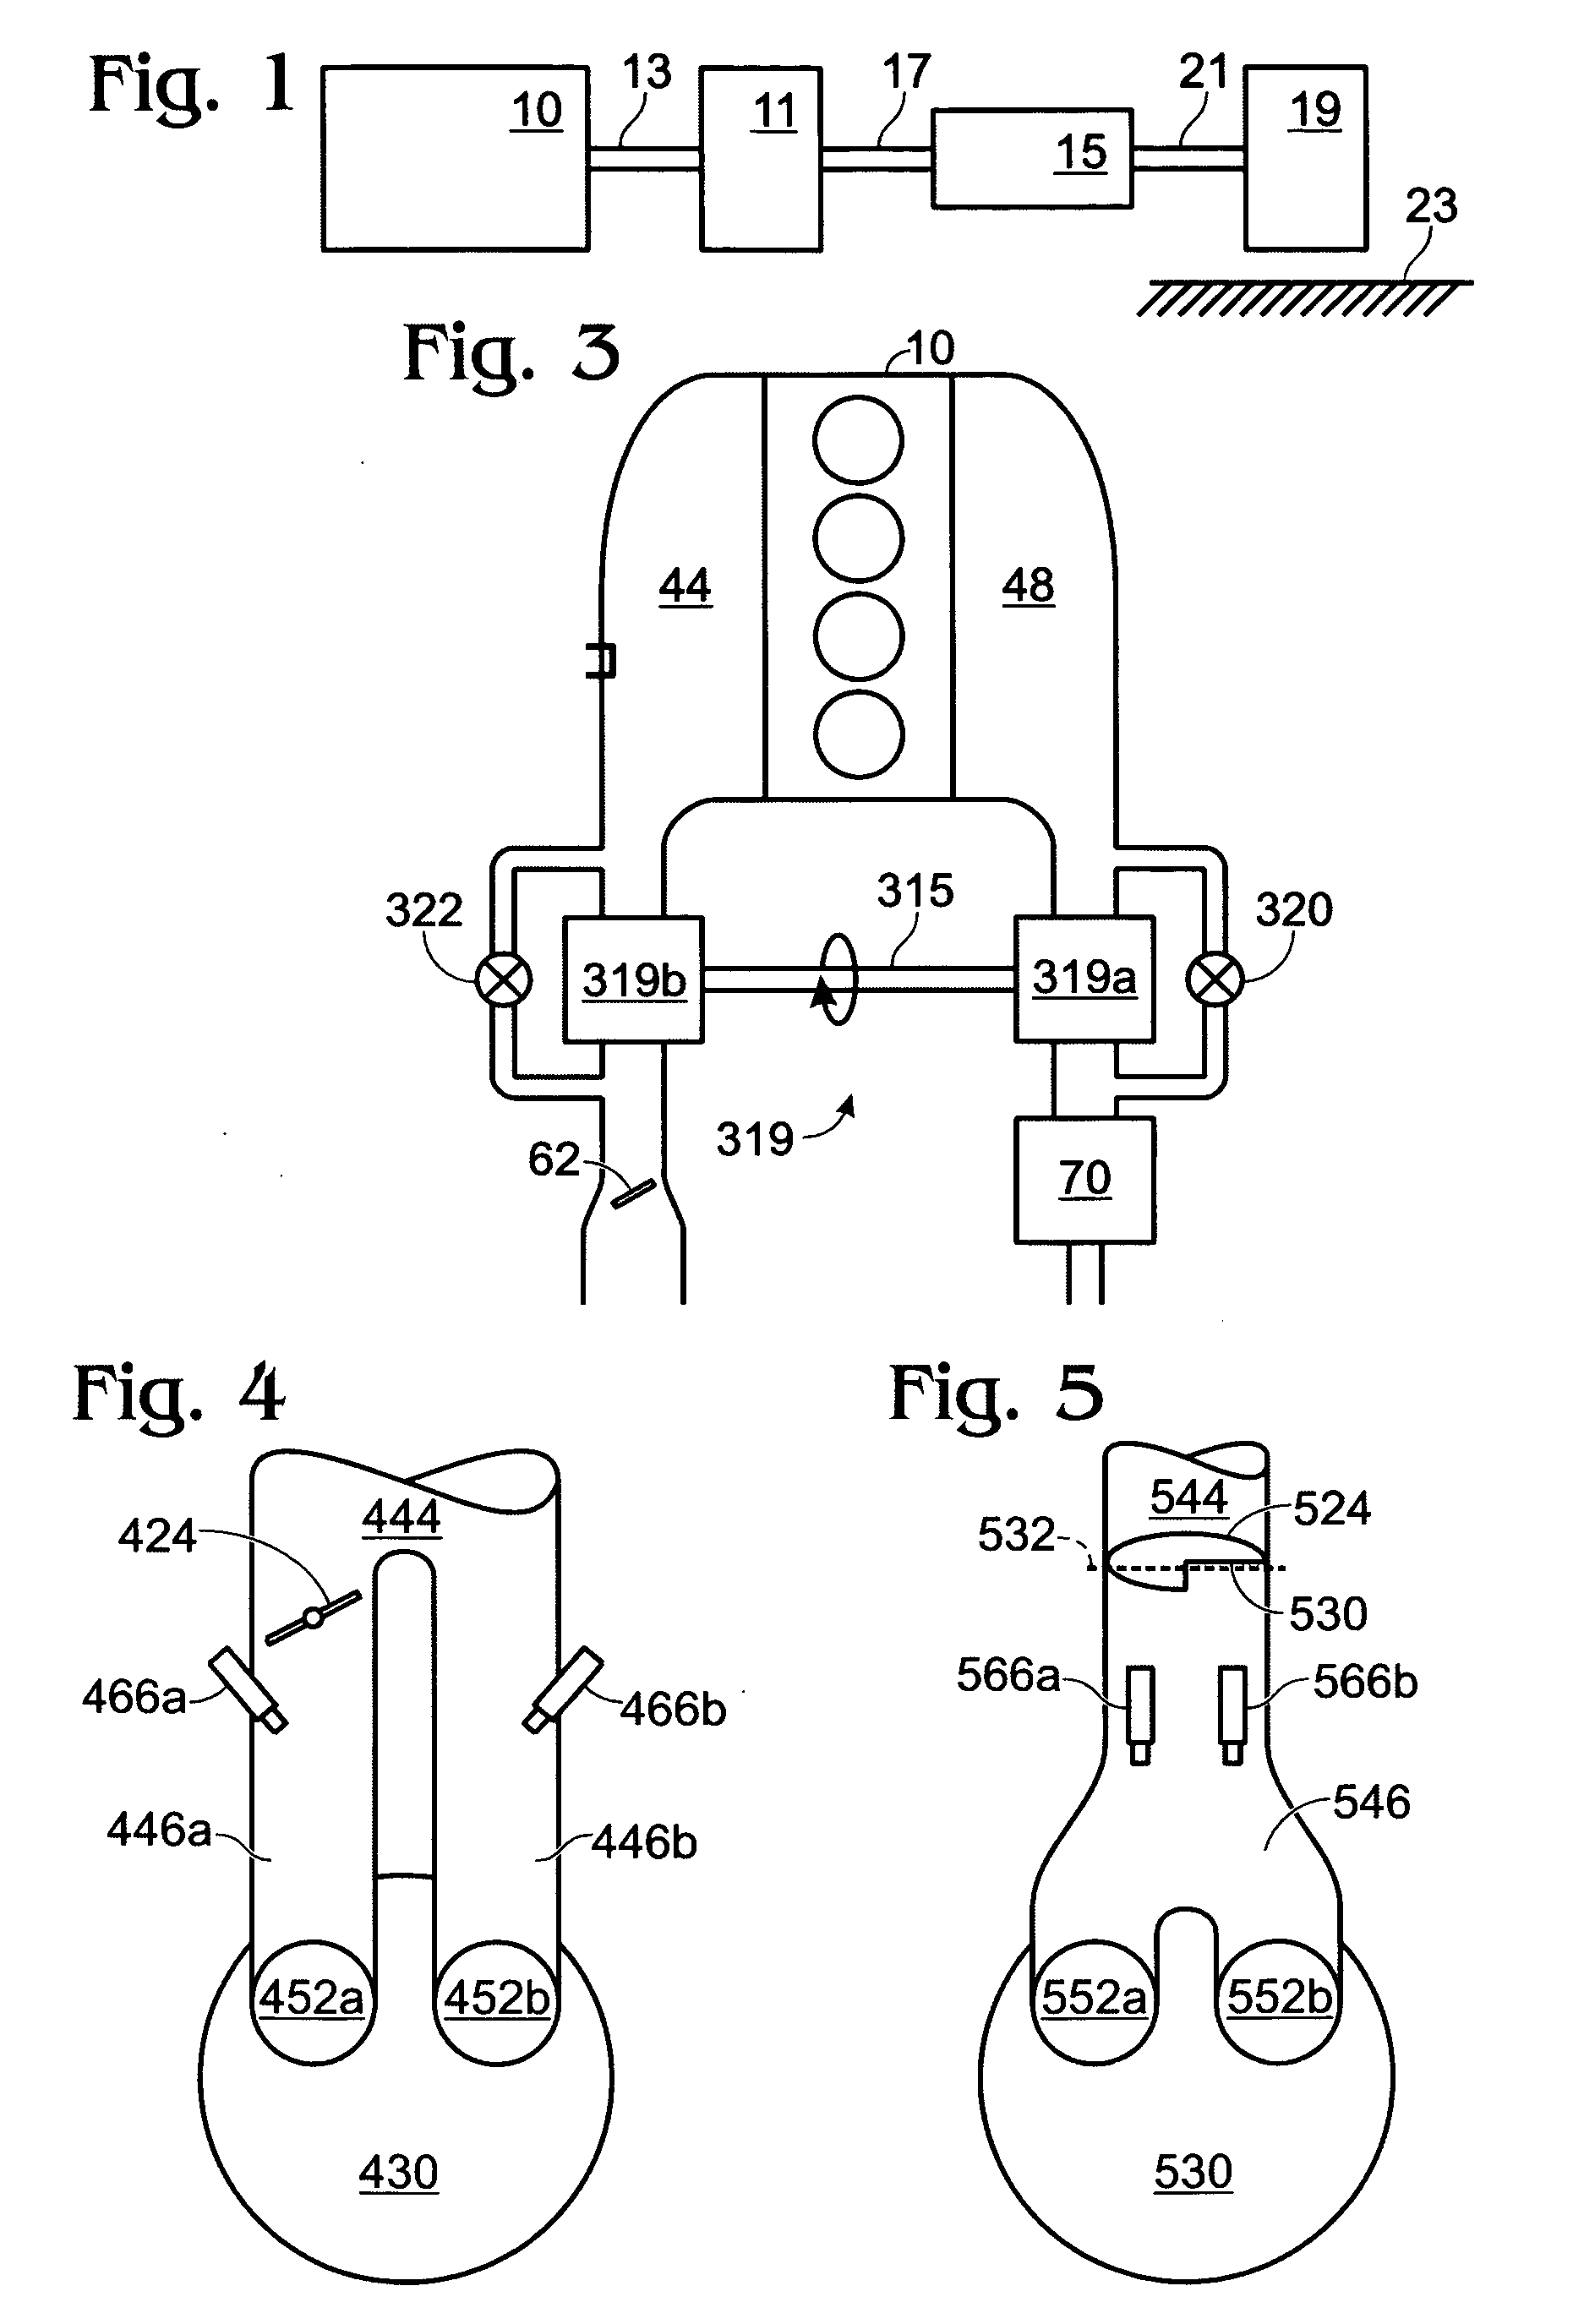 Engine with two port fuel injectors